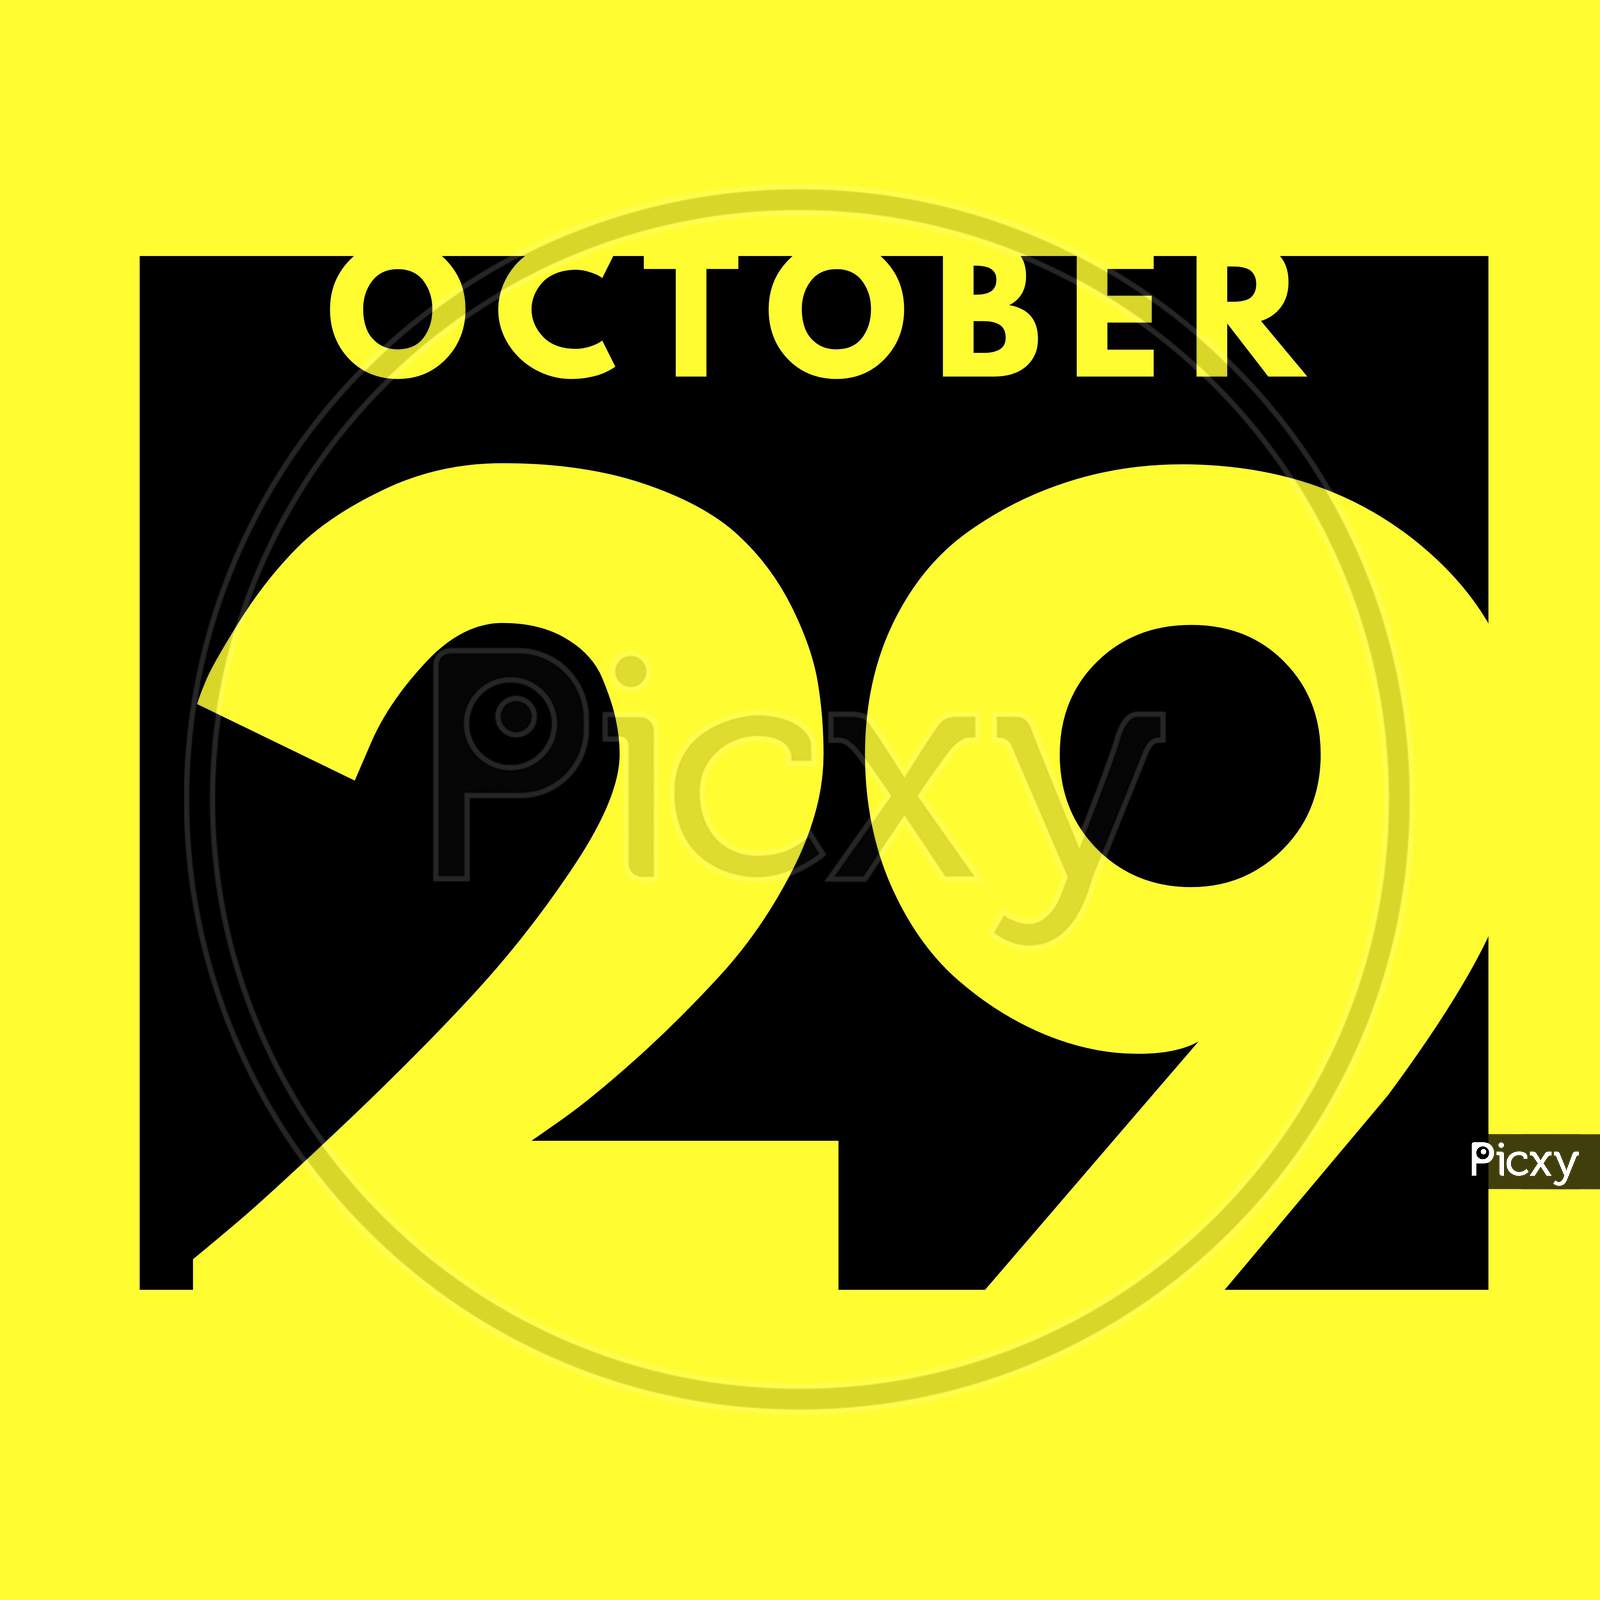 October 29 . Flat Modern Daily Calendar Icon .Date ,Day, Month .Calendar For The Month Of October